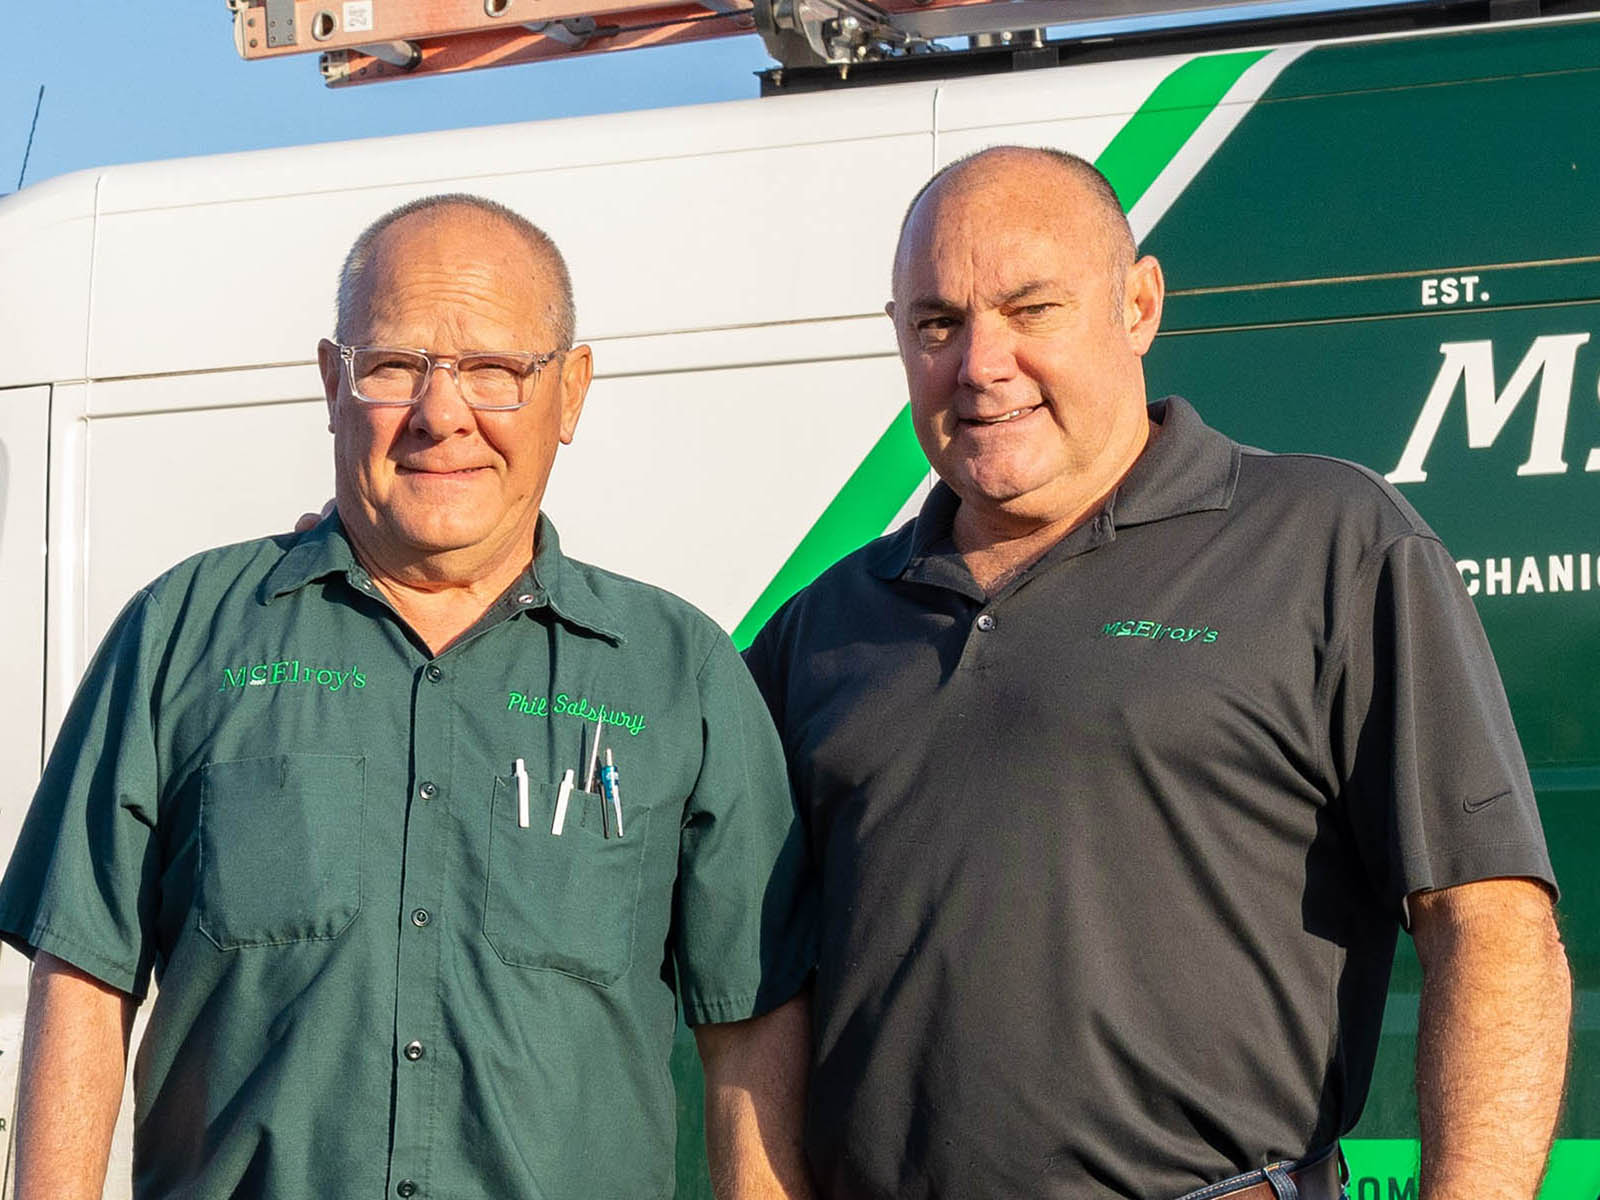 HVAC tech Phil Salsbury and Greg Hunsicker, McElroy’s VP of residential HVAC, have both worked for McElroy’s since 1983.